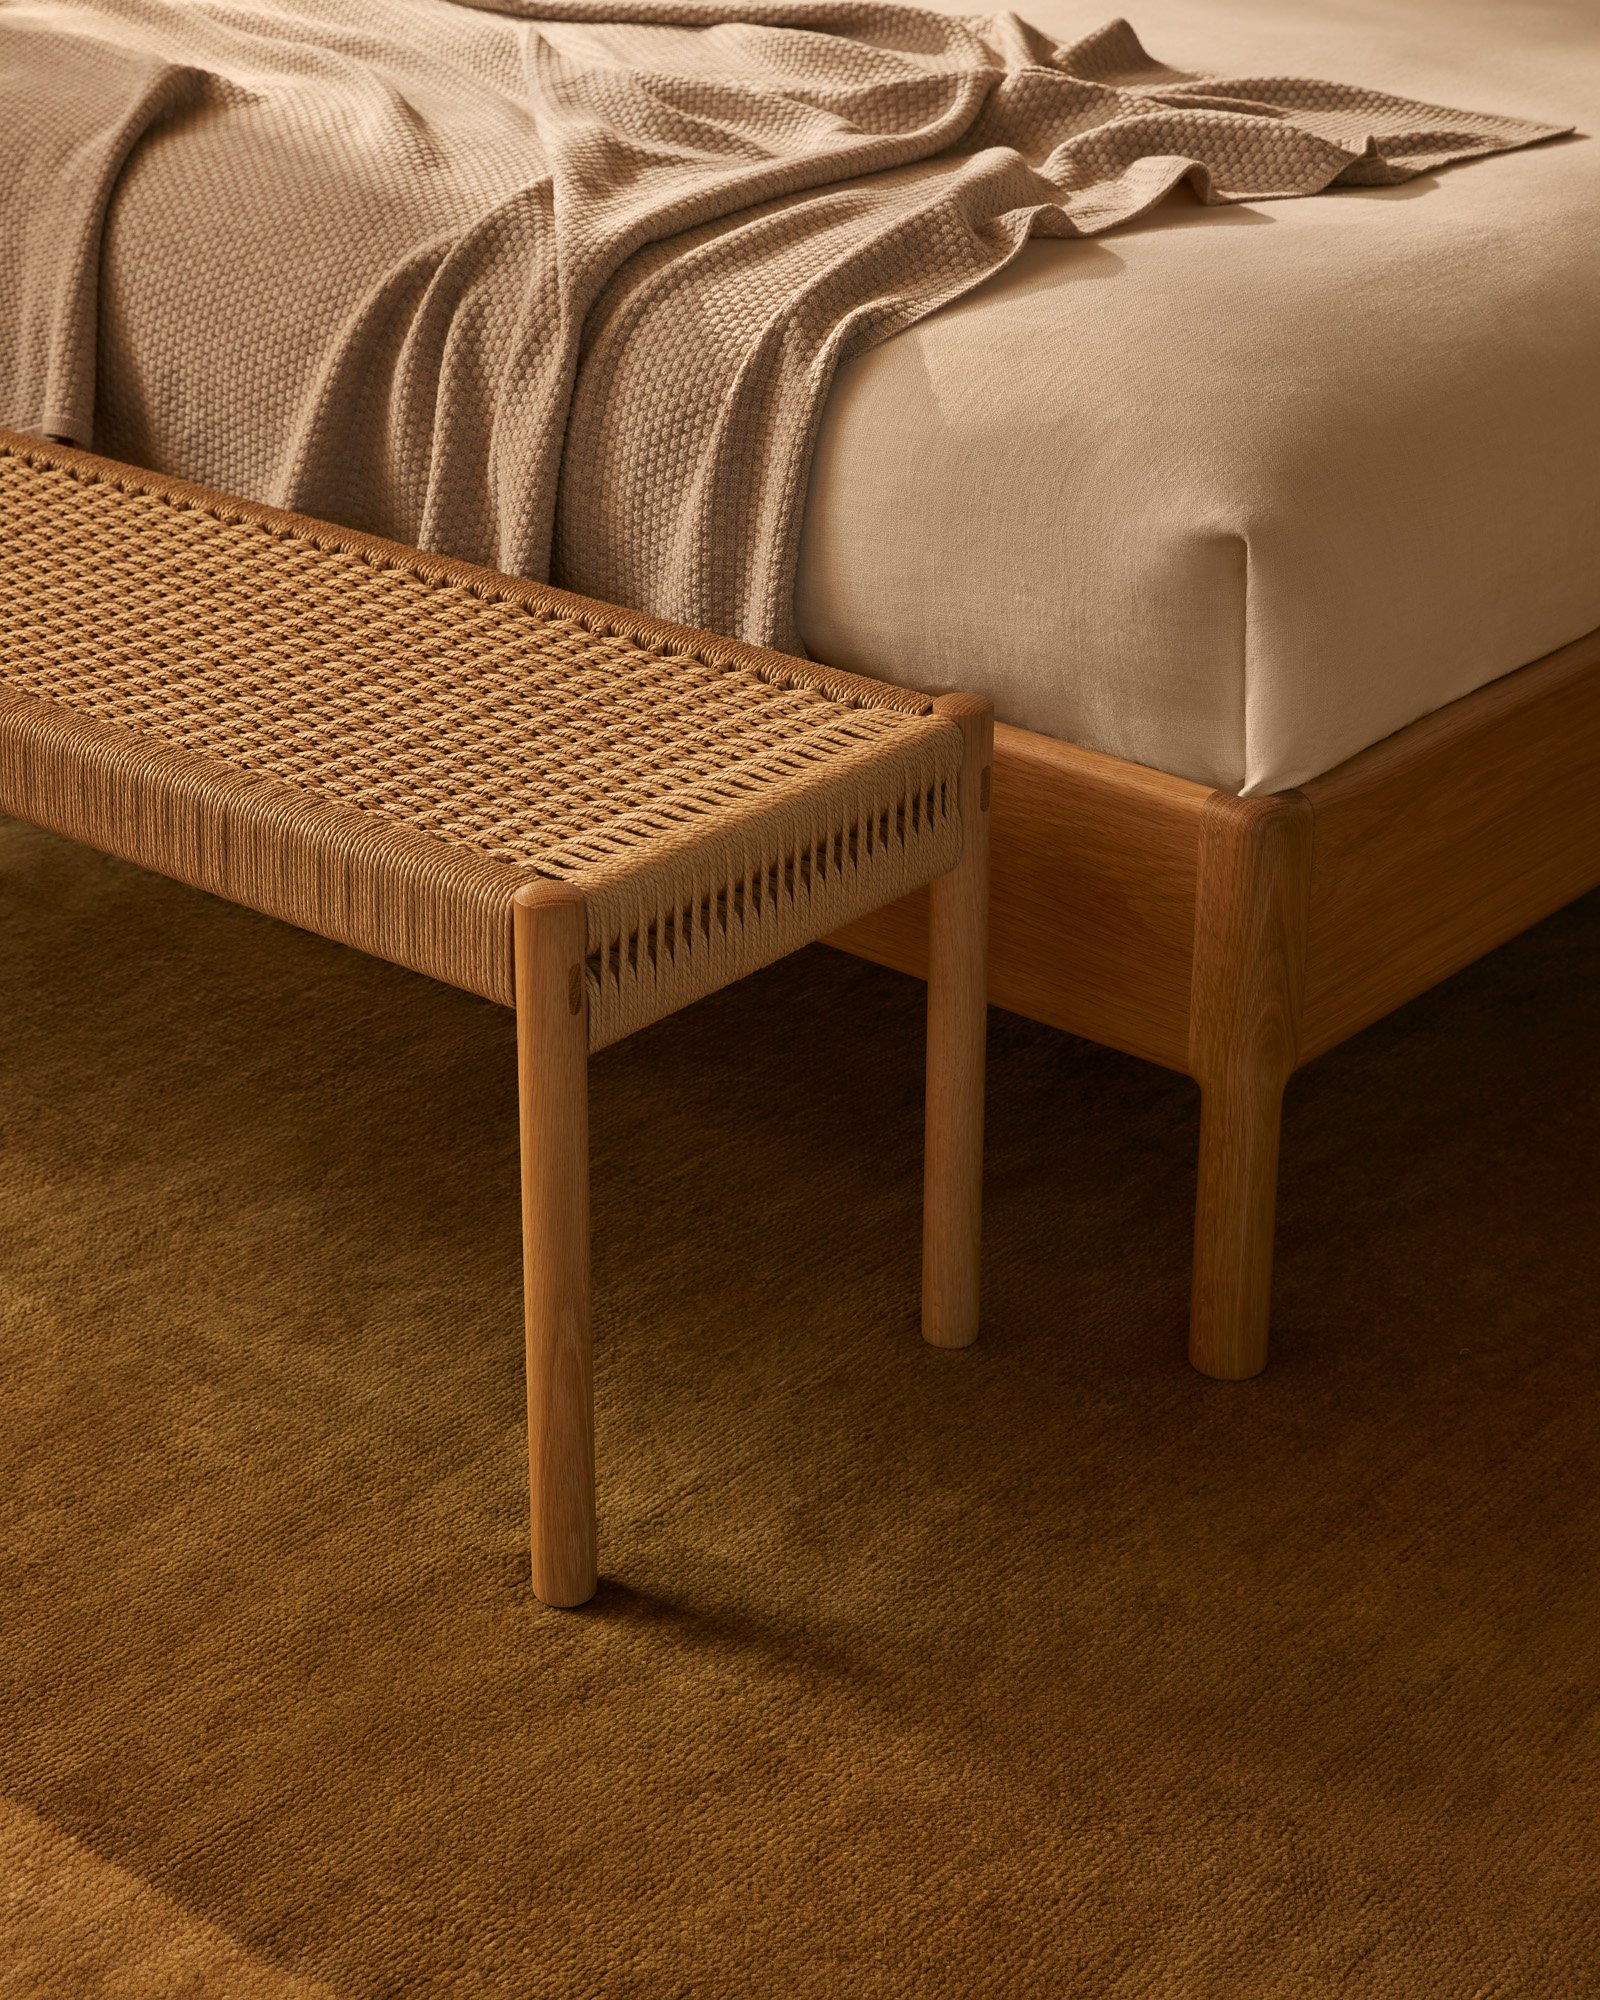 WOVEN BENCH SEAT